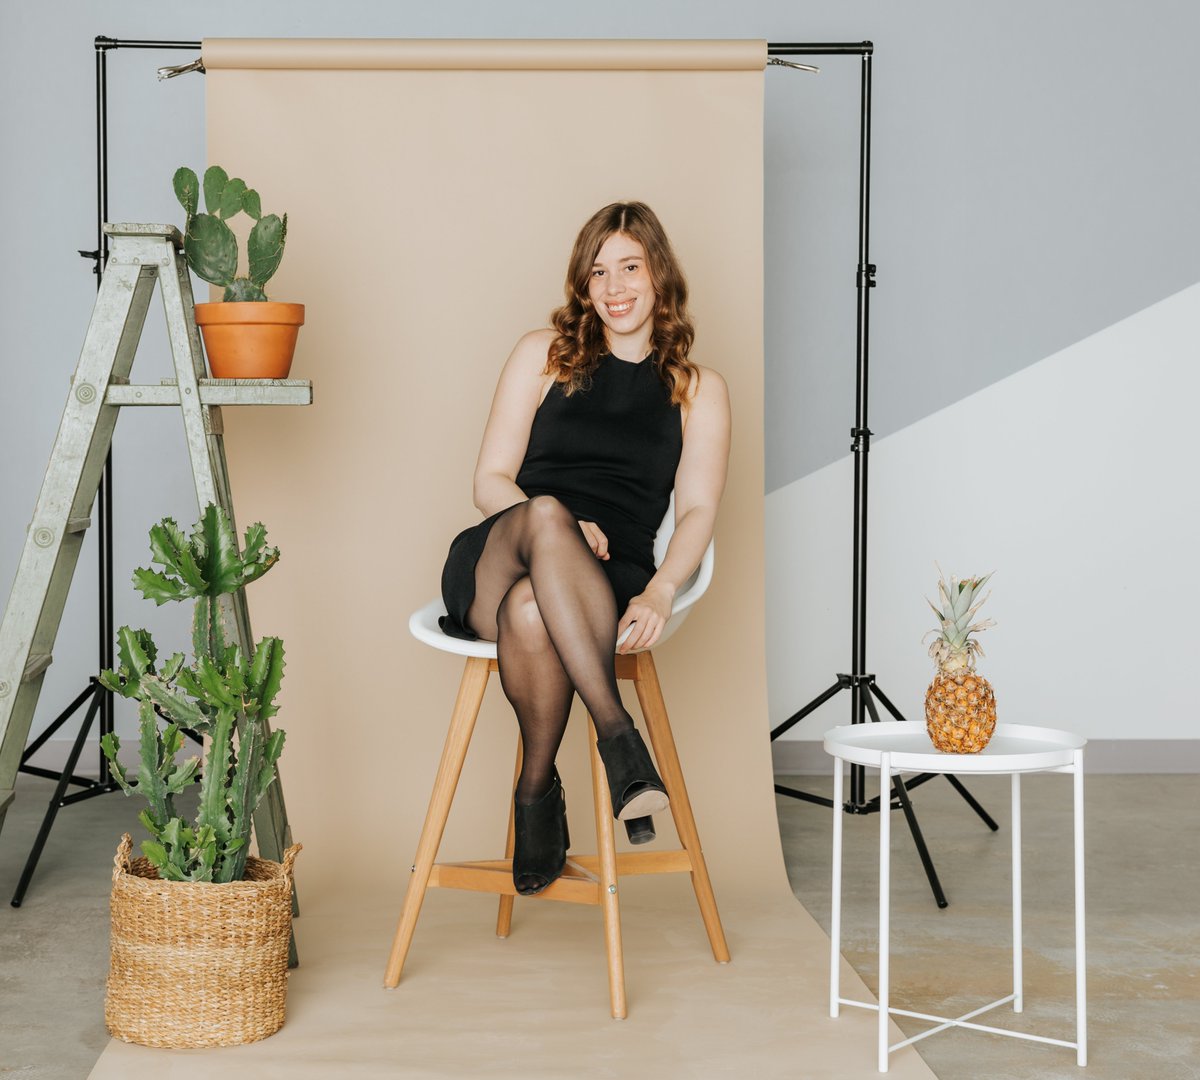 Katherine Homuth sitting in a black dress and Sheertex stockings on a stool set against a backdrop with cacti surrounding her.